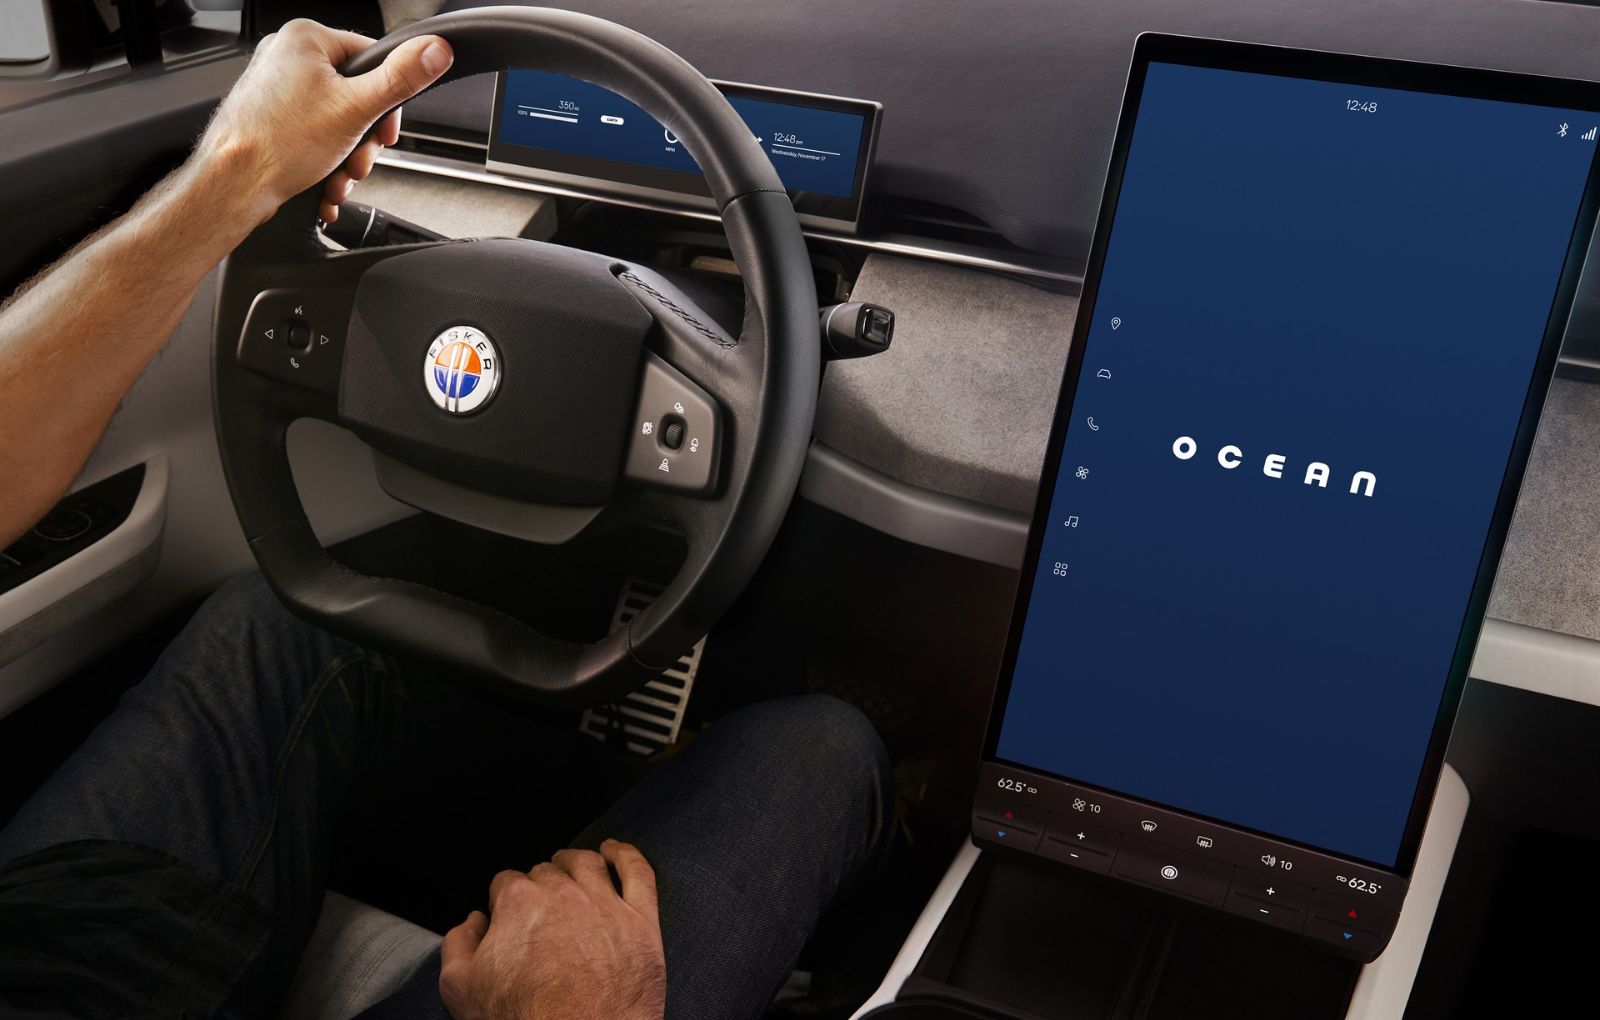 The exciting 2022 Fisker Ocean SUV is the first production car to feature a digital radar